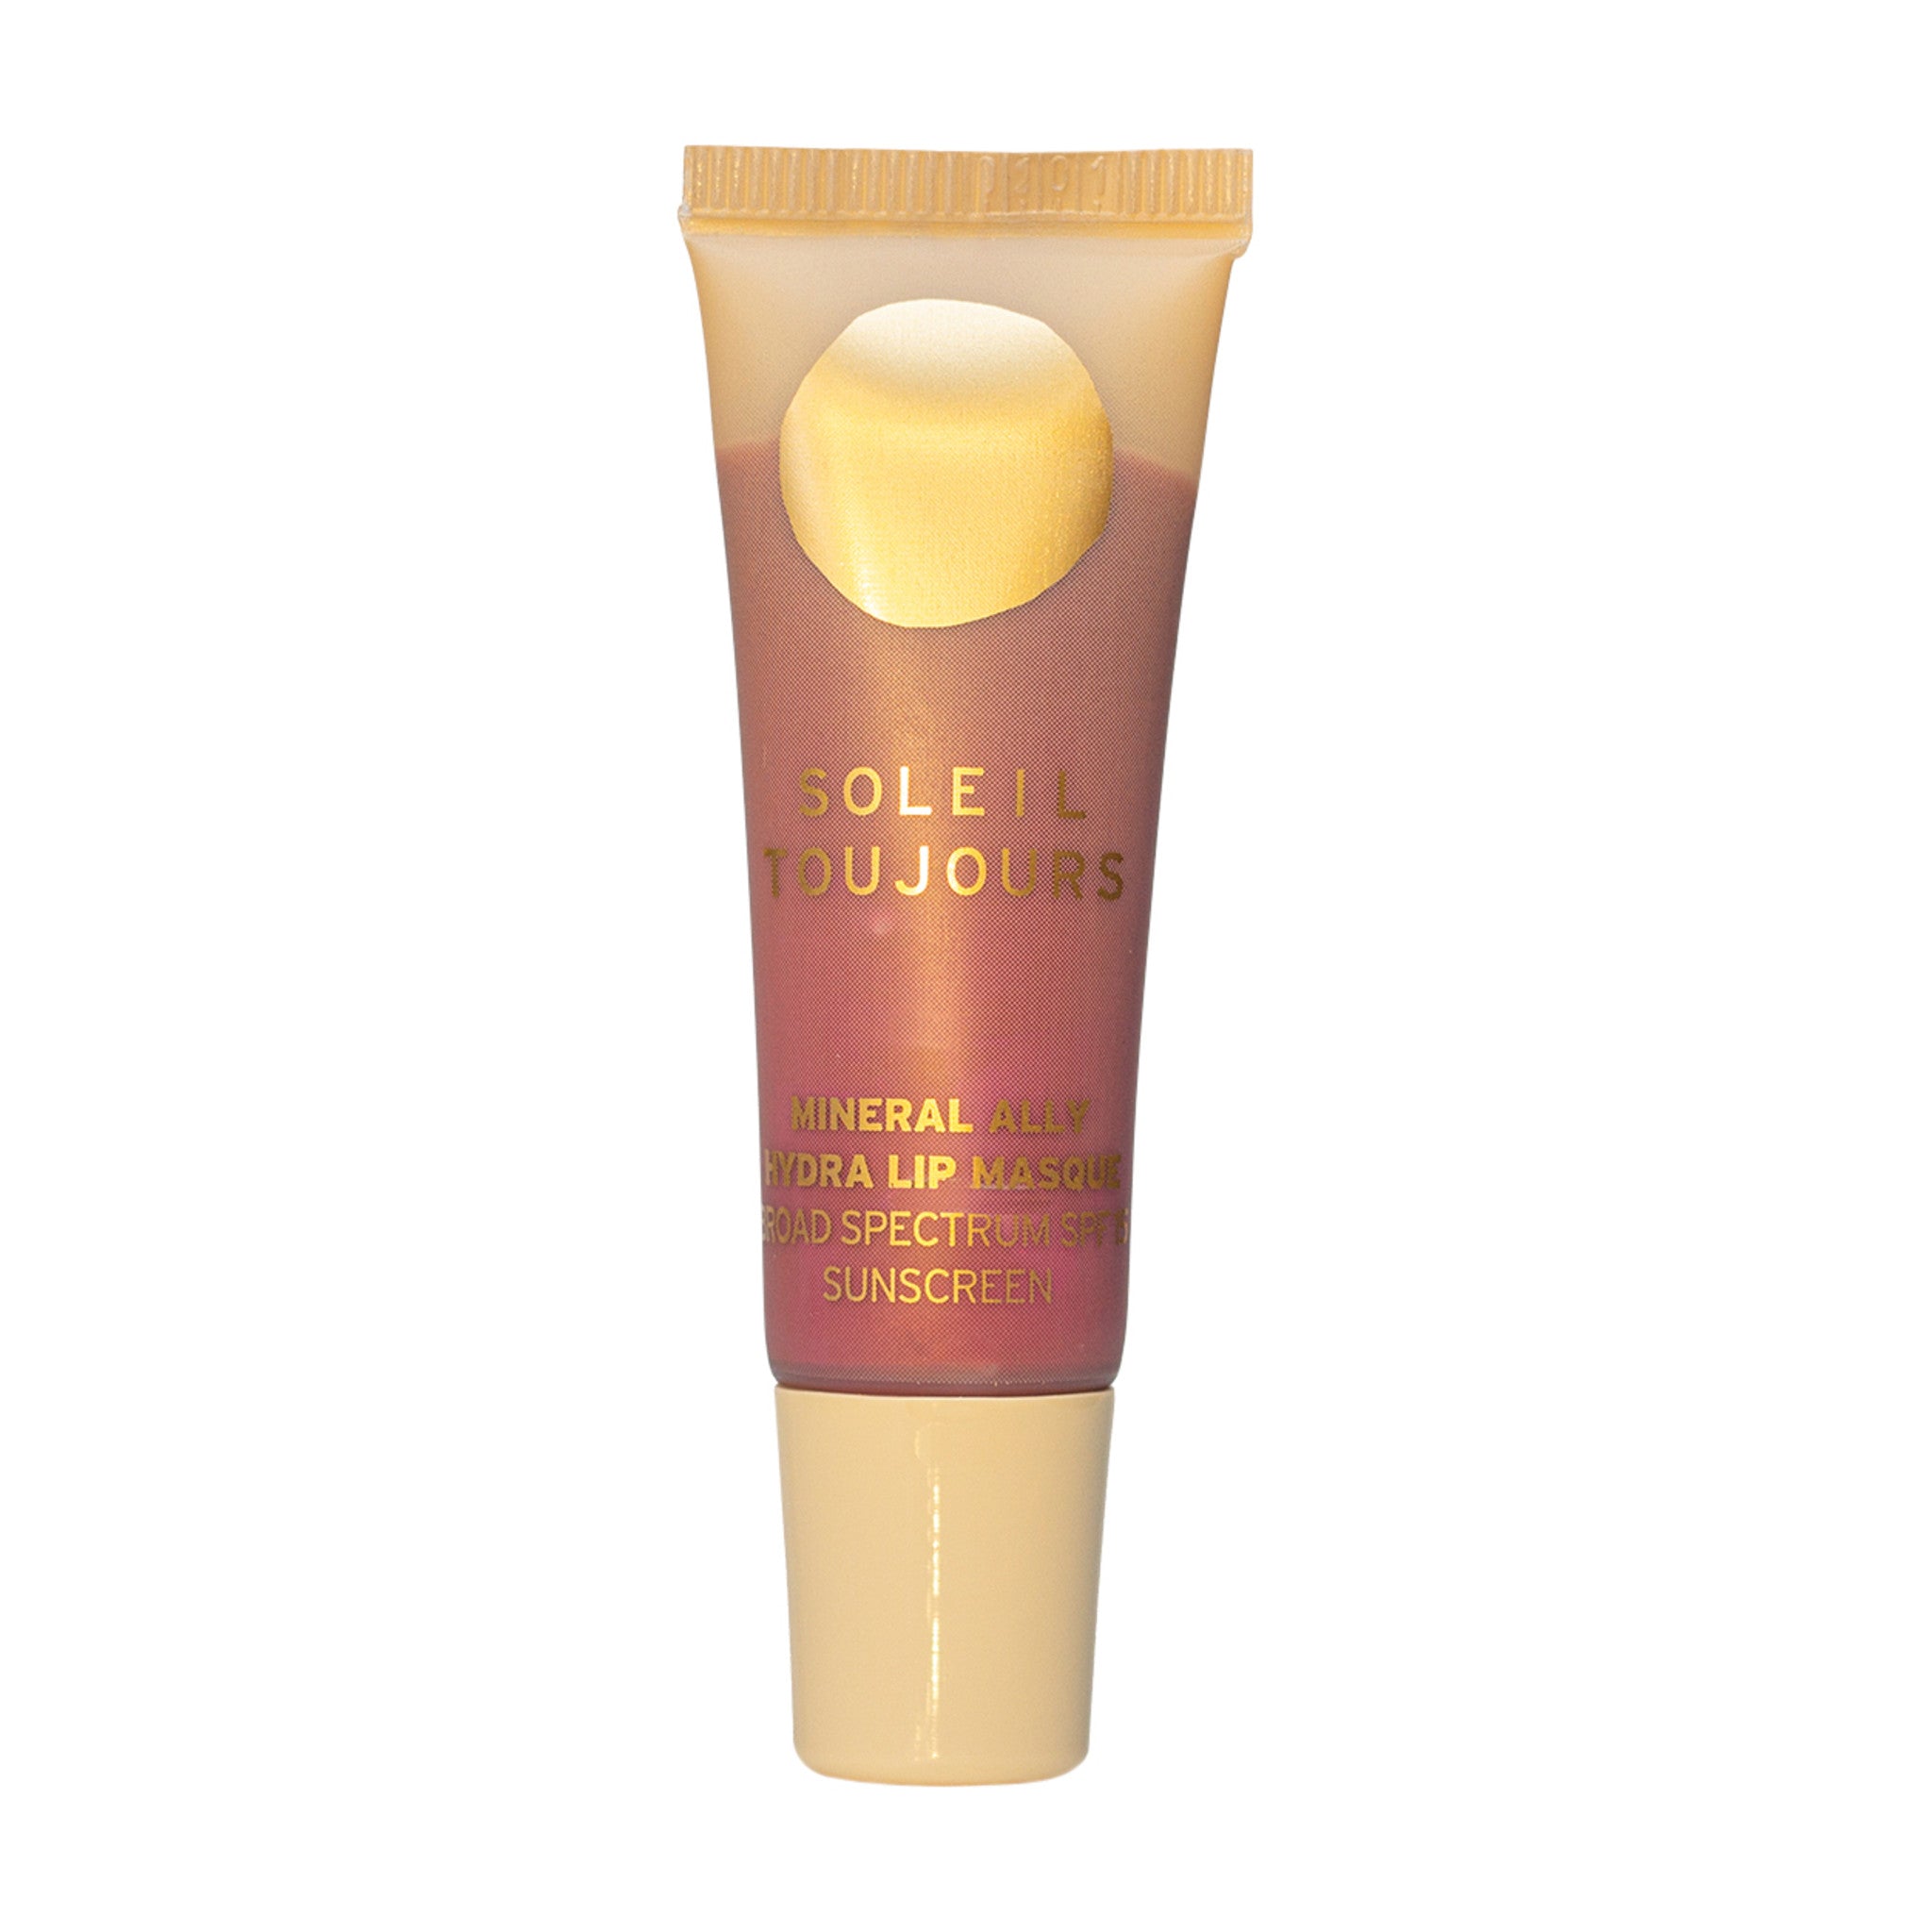 Soleil Toujours Mineral Ally Hydra Lip Masque SPF 15 Color/Shade variant: Cinquante Cinq main image.